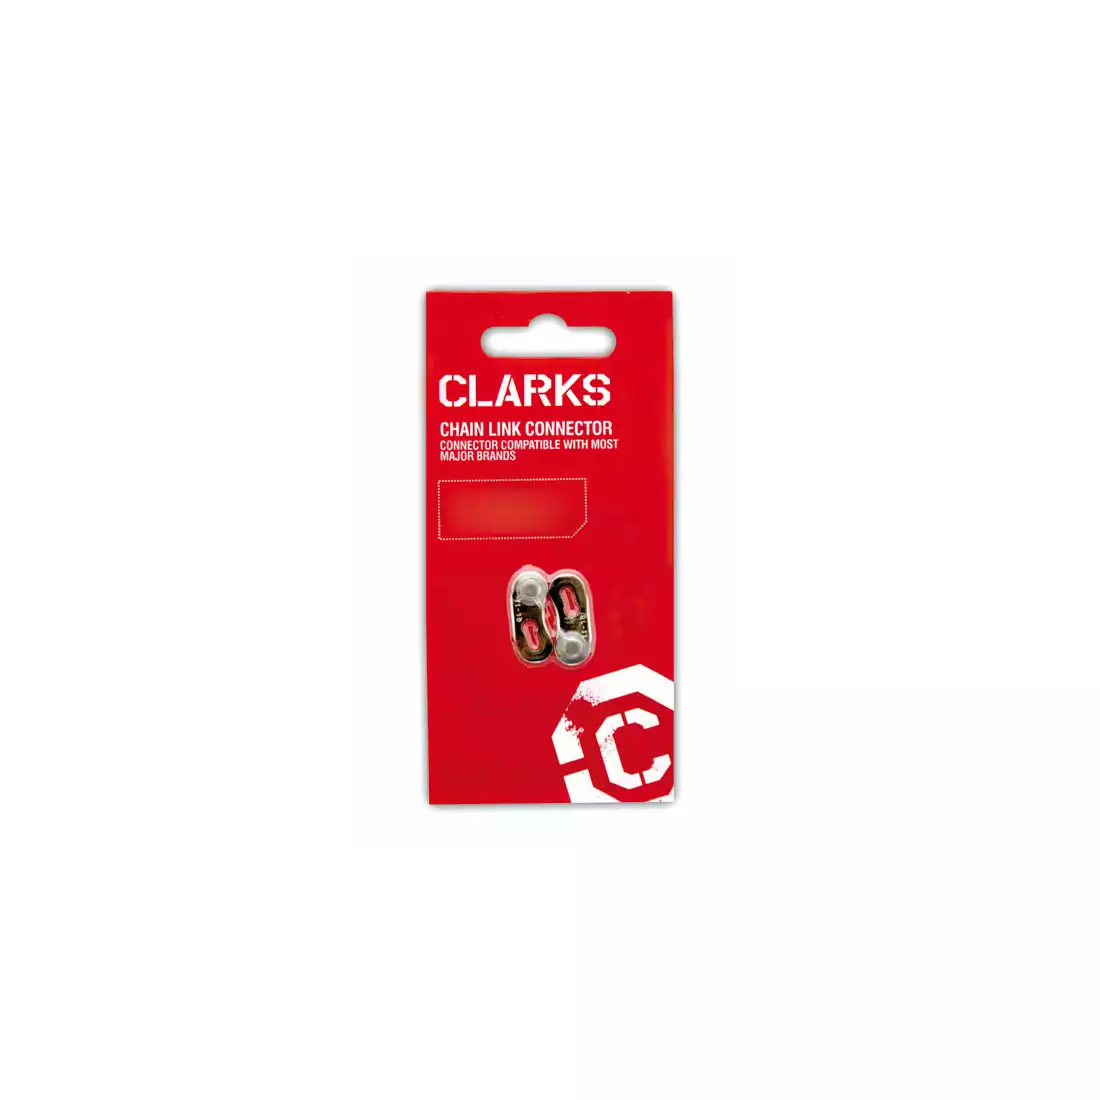 CLARKS CL9 Bicycle chain clip, 9-speed, Silver